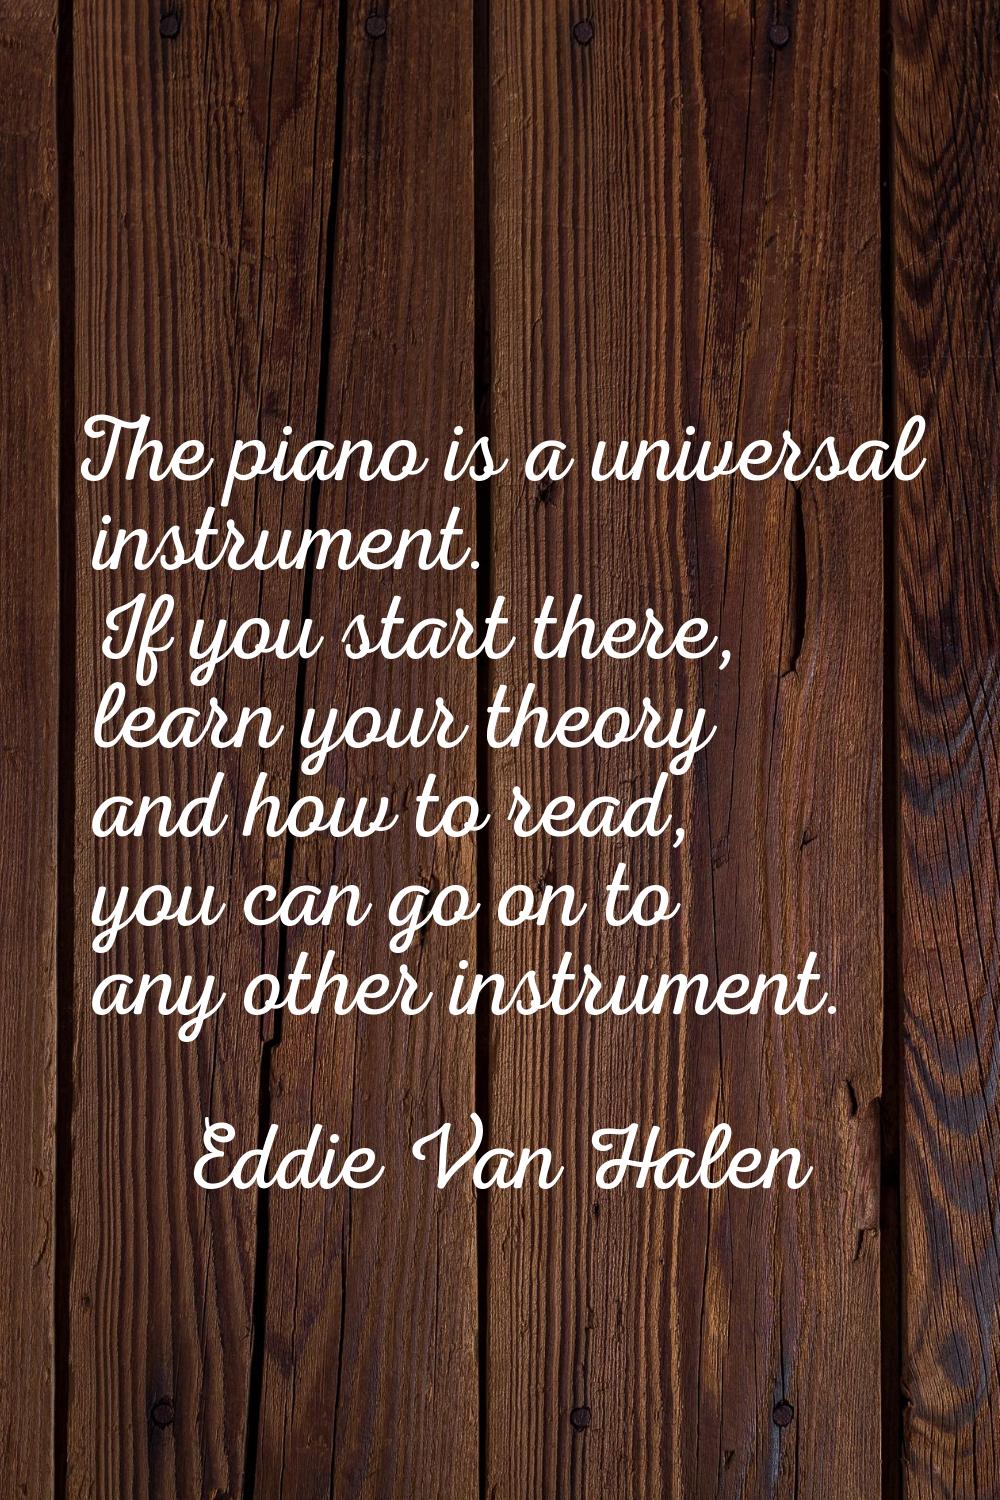 The piano is a universal instrument. If you start there, learn your theory and how to read, you can